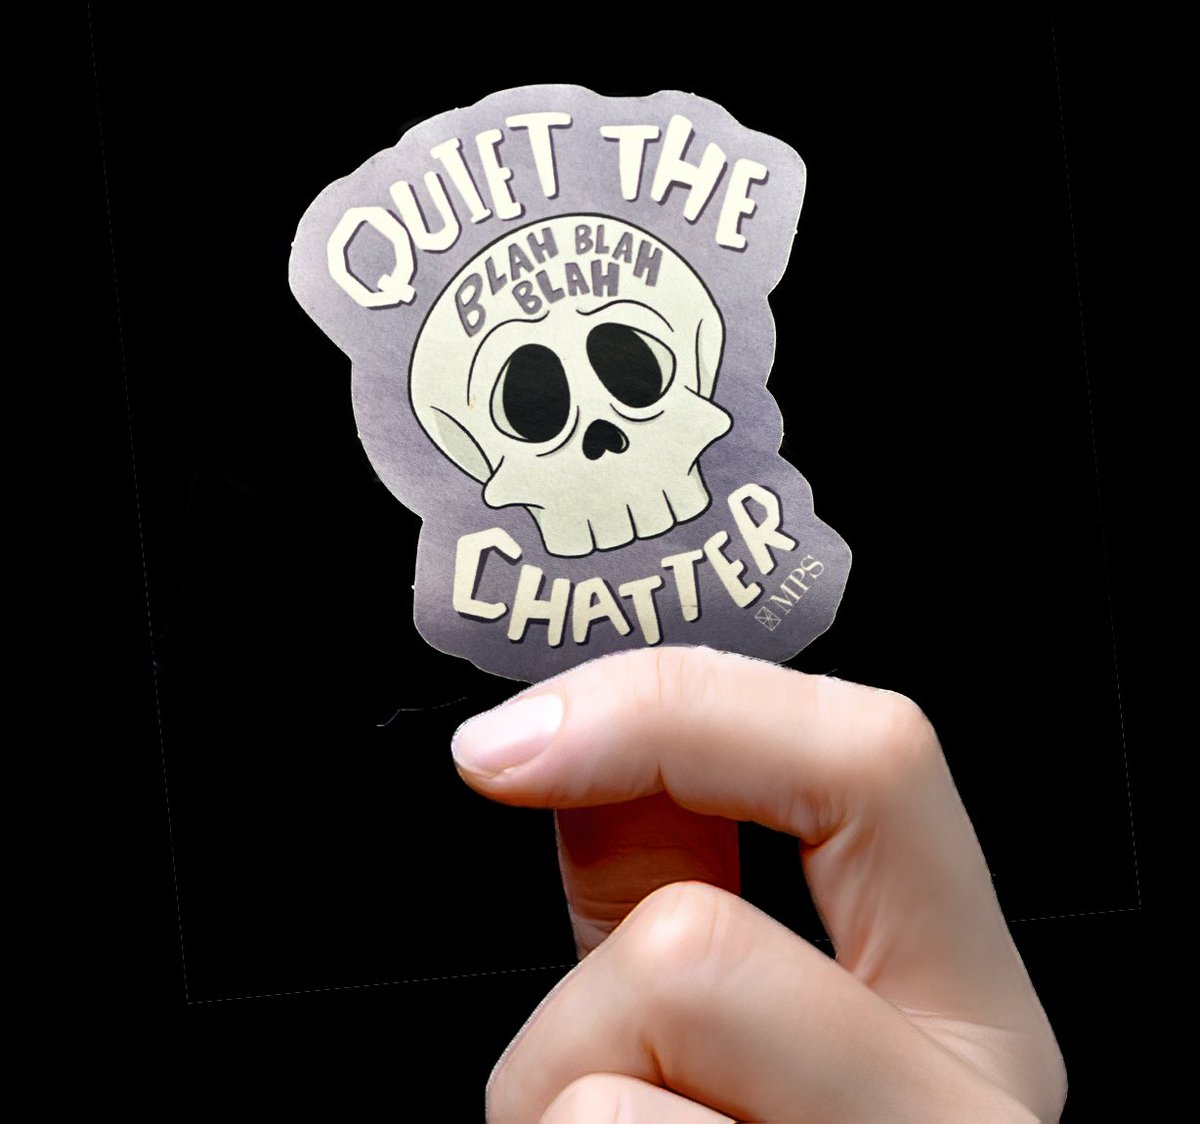 💀🎉 New Sticker Alert! 🌟 Bringing some deadly good vibes to your acoustic solutions! 💀🎶 Stay tuned, because more sticker designs are lurking just around the corner! 🎵😄 #MPSAcoustics #NewSticker #ComingSoon